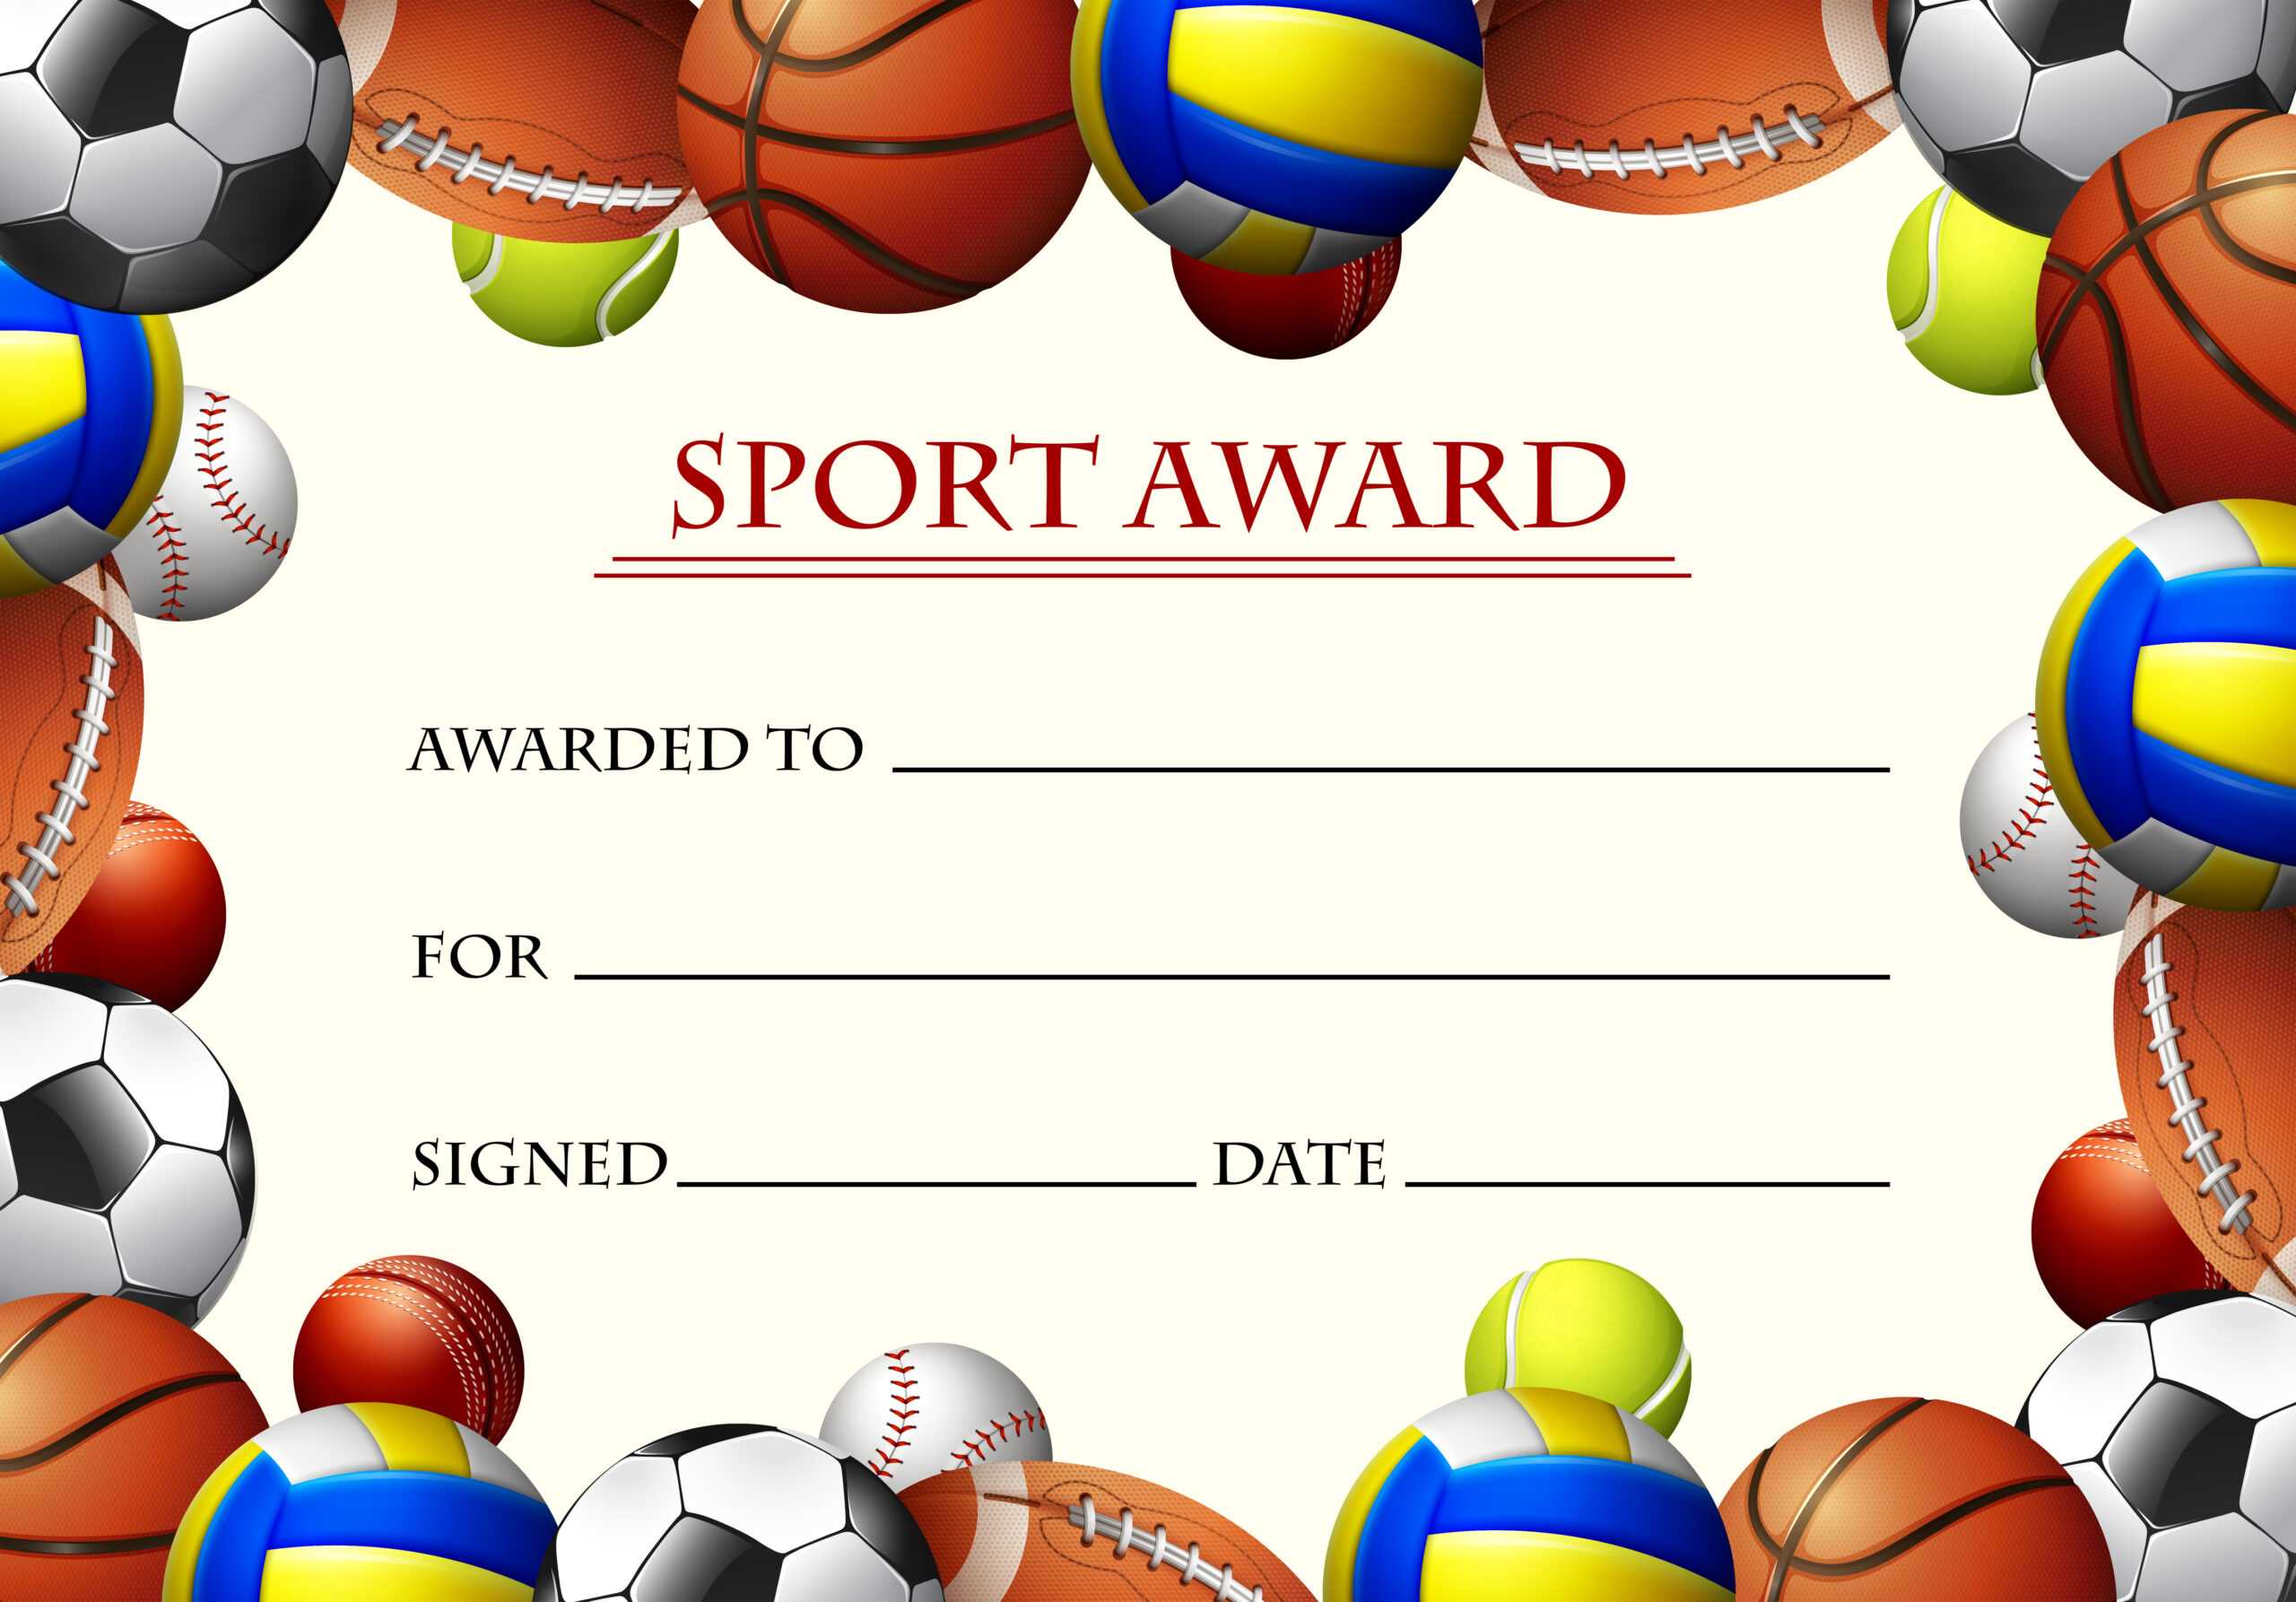 Certificate Template For Sport Award – Download Free Vectors Within Basketball Camp Certificate Template